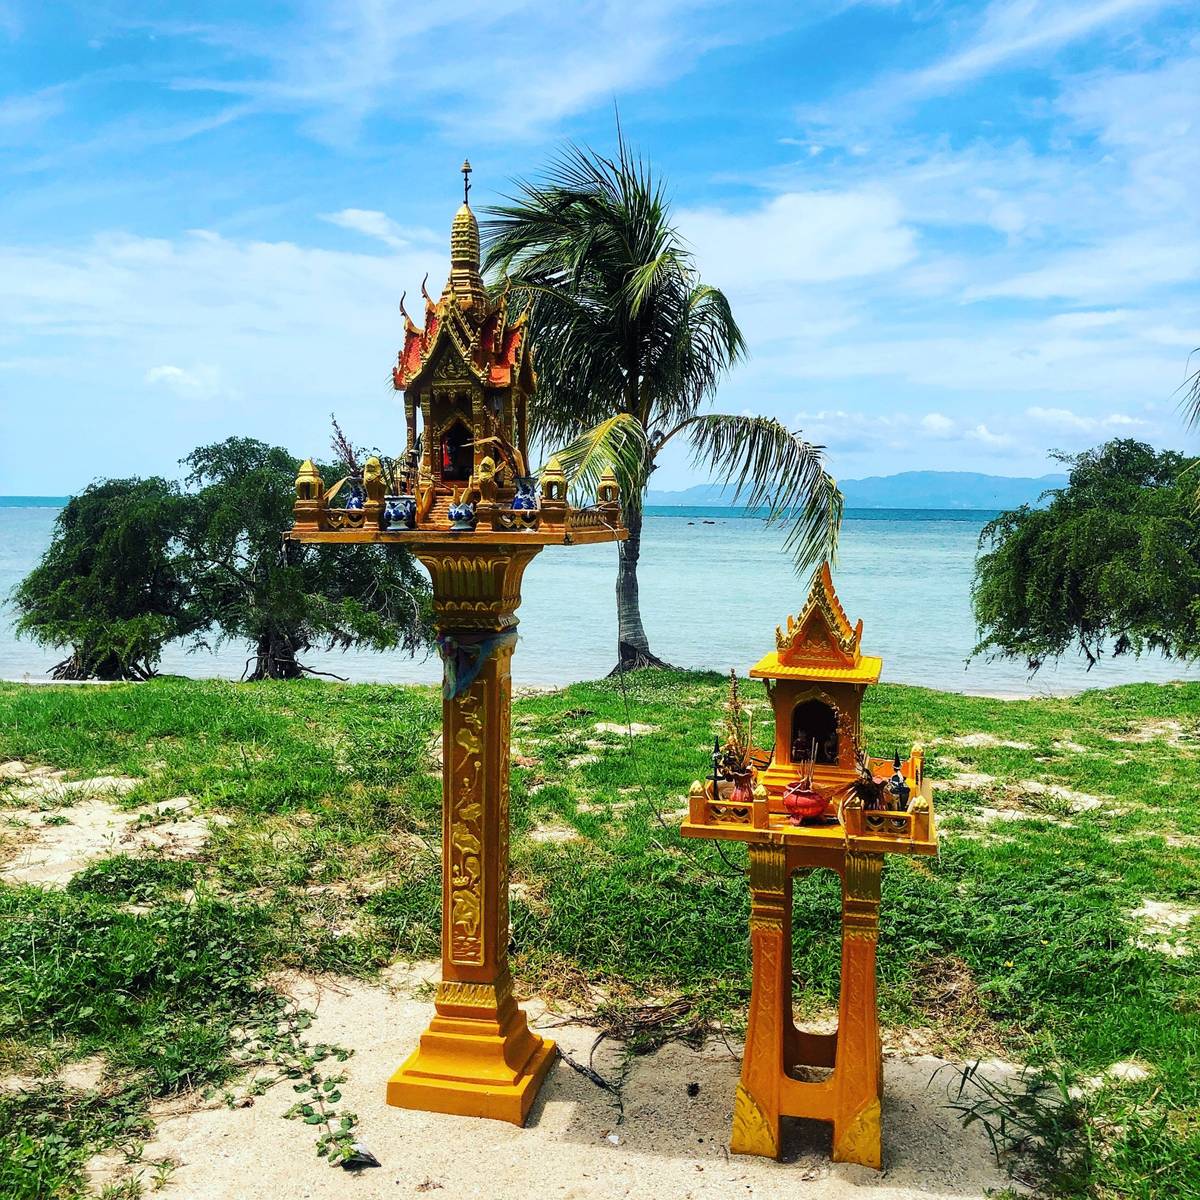 You’ll find amazing views everywhere in Koh Phangan